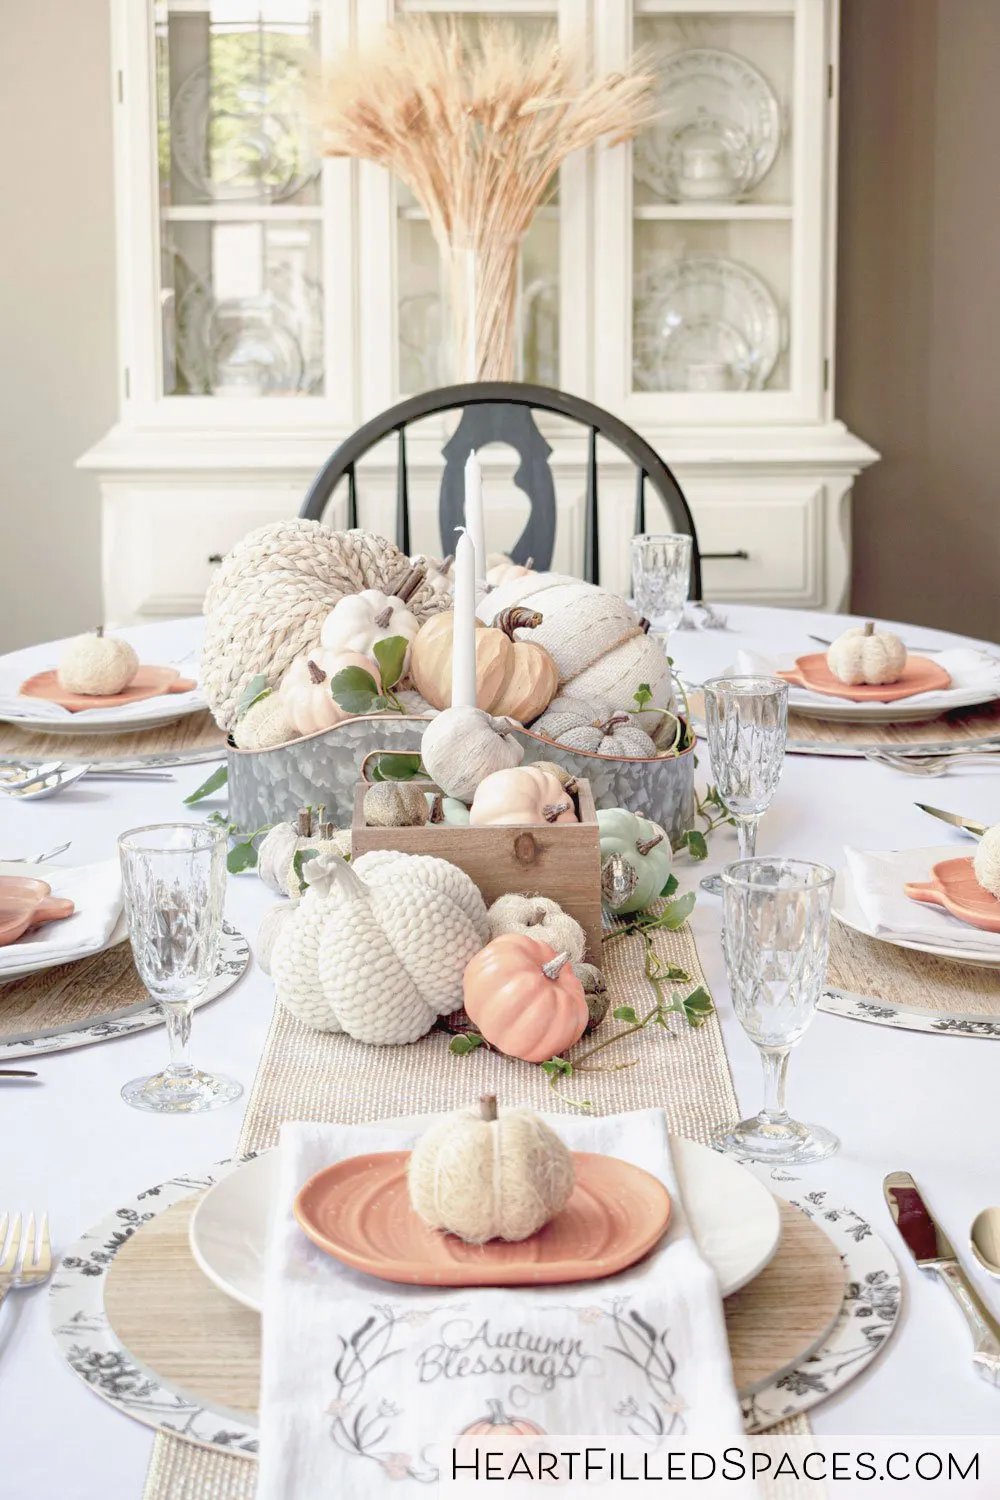 Gobble Up Inspiration: 33 Thanksgiving Decoration Ideas for Every Corner